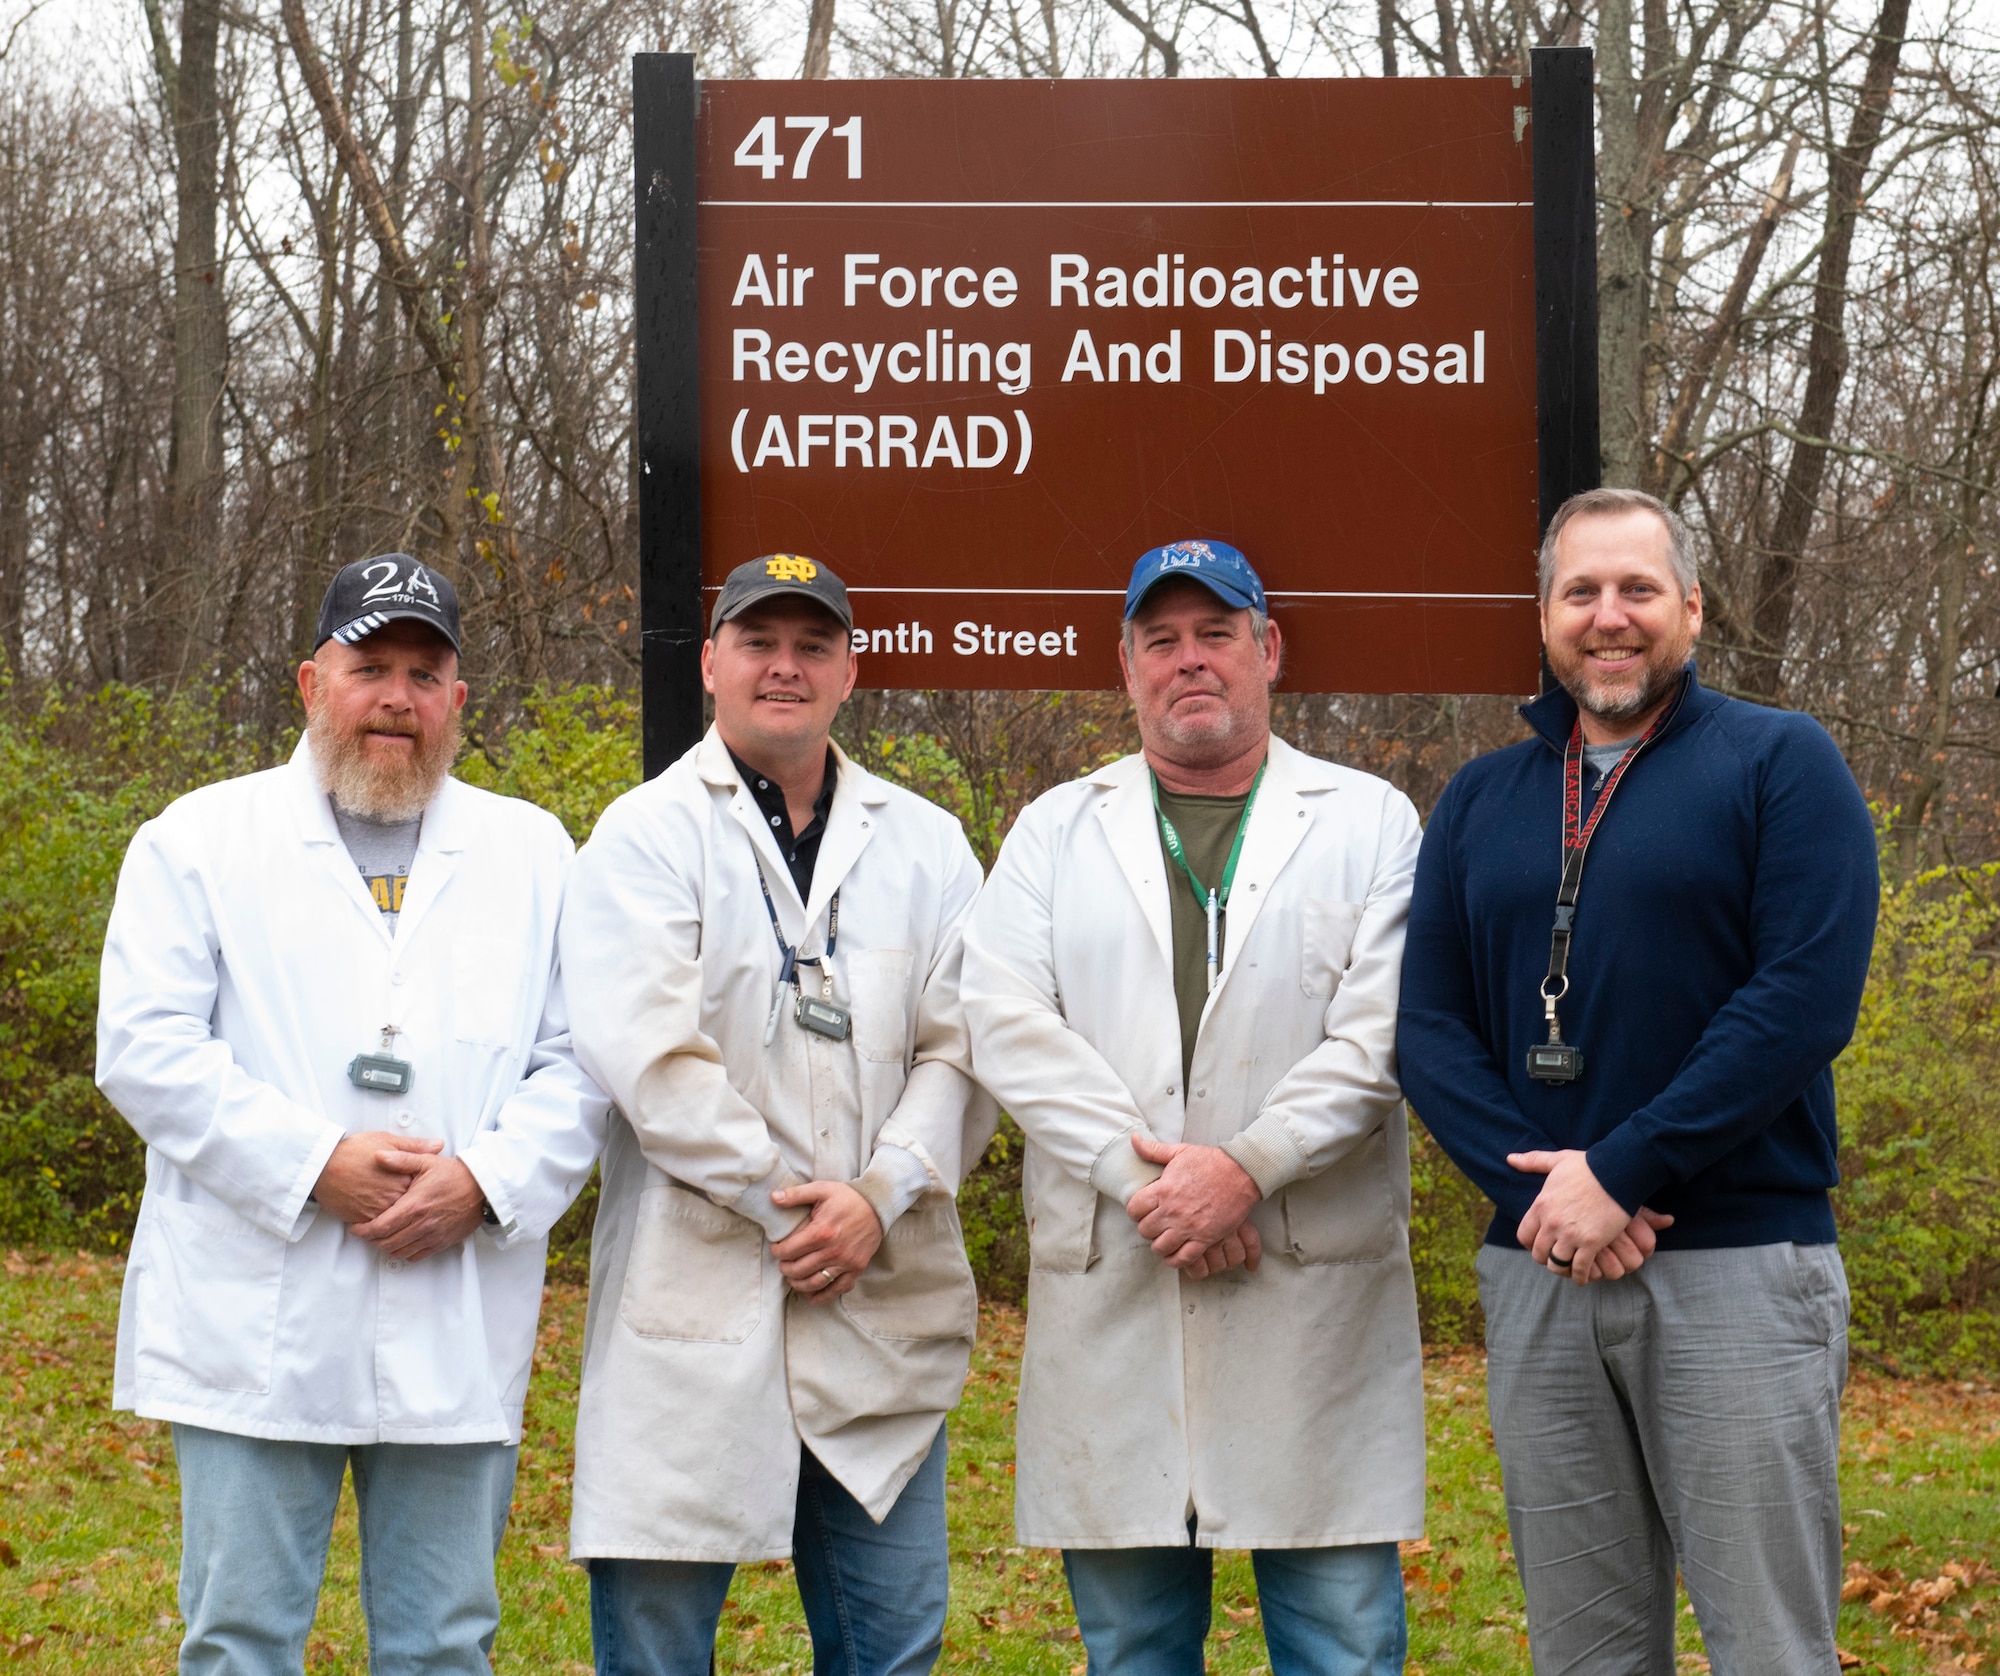 The Air Force Radioactive Recycling and Disposal team stand outside their facility on Wright-Patterson Air Force Base, Ohio. The team won the 2022 Secretary of Defense Environmental Award for Environmental Quality. (U.S. Air Force photo by Jaima Fogg)